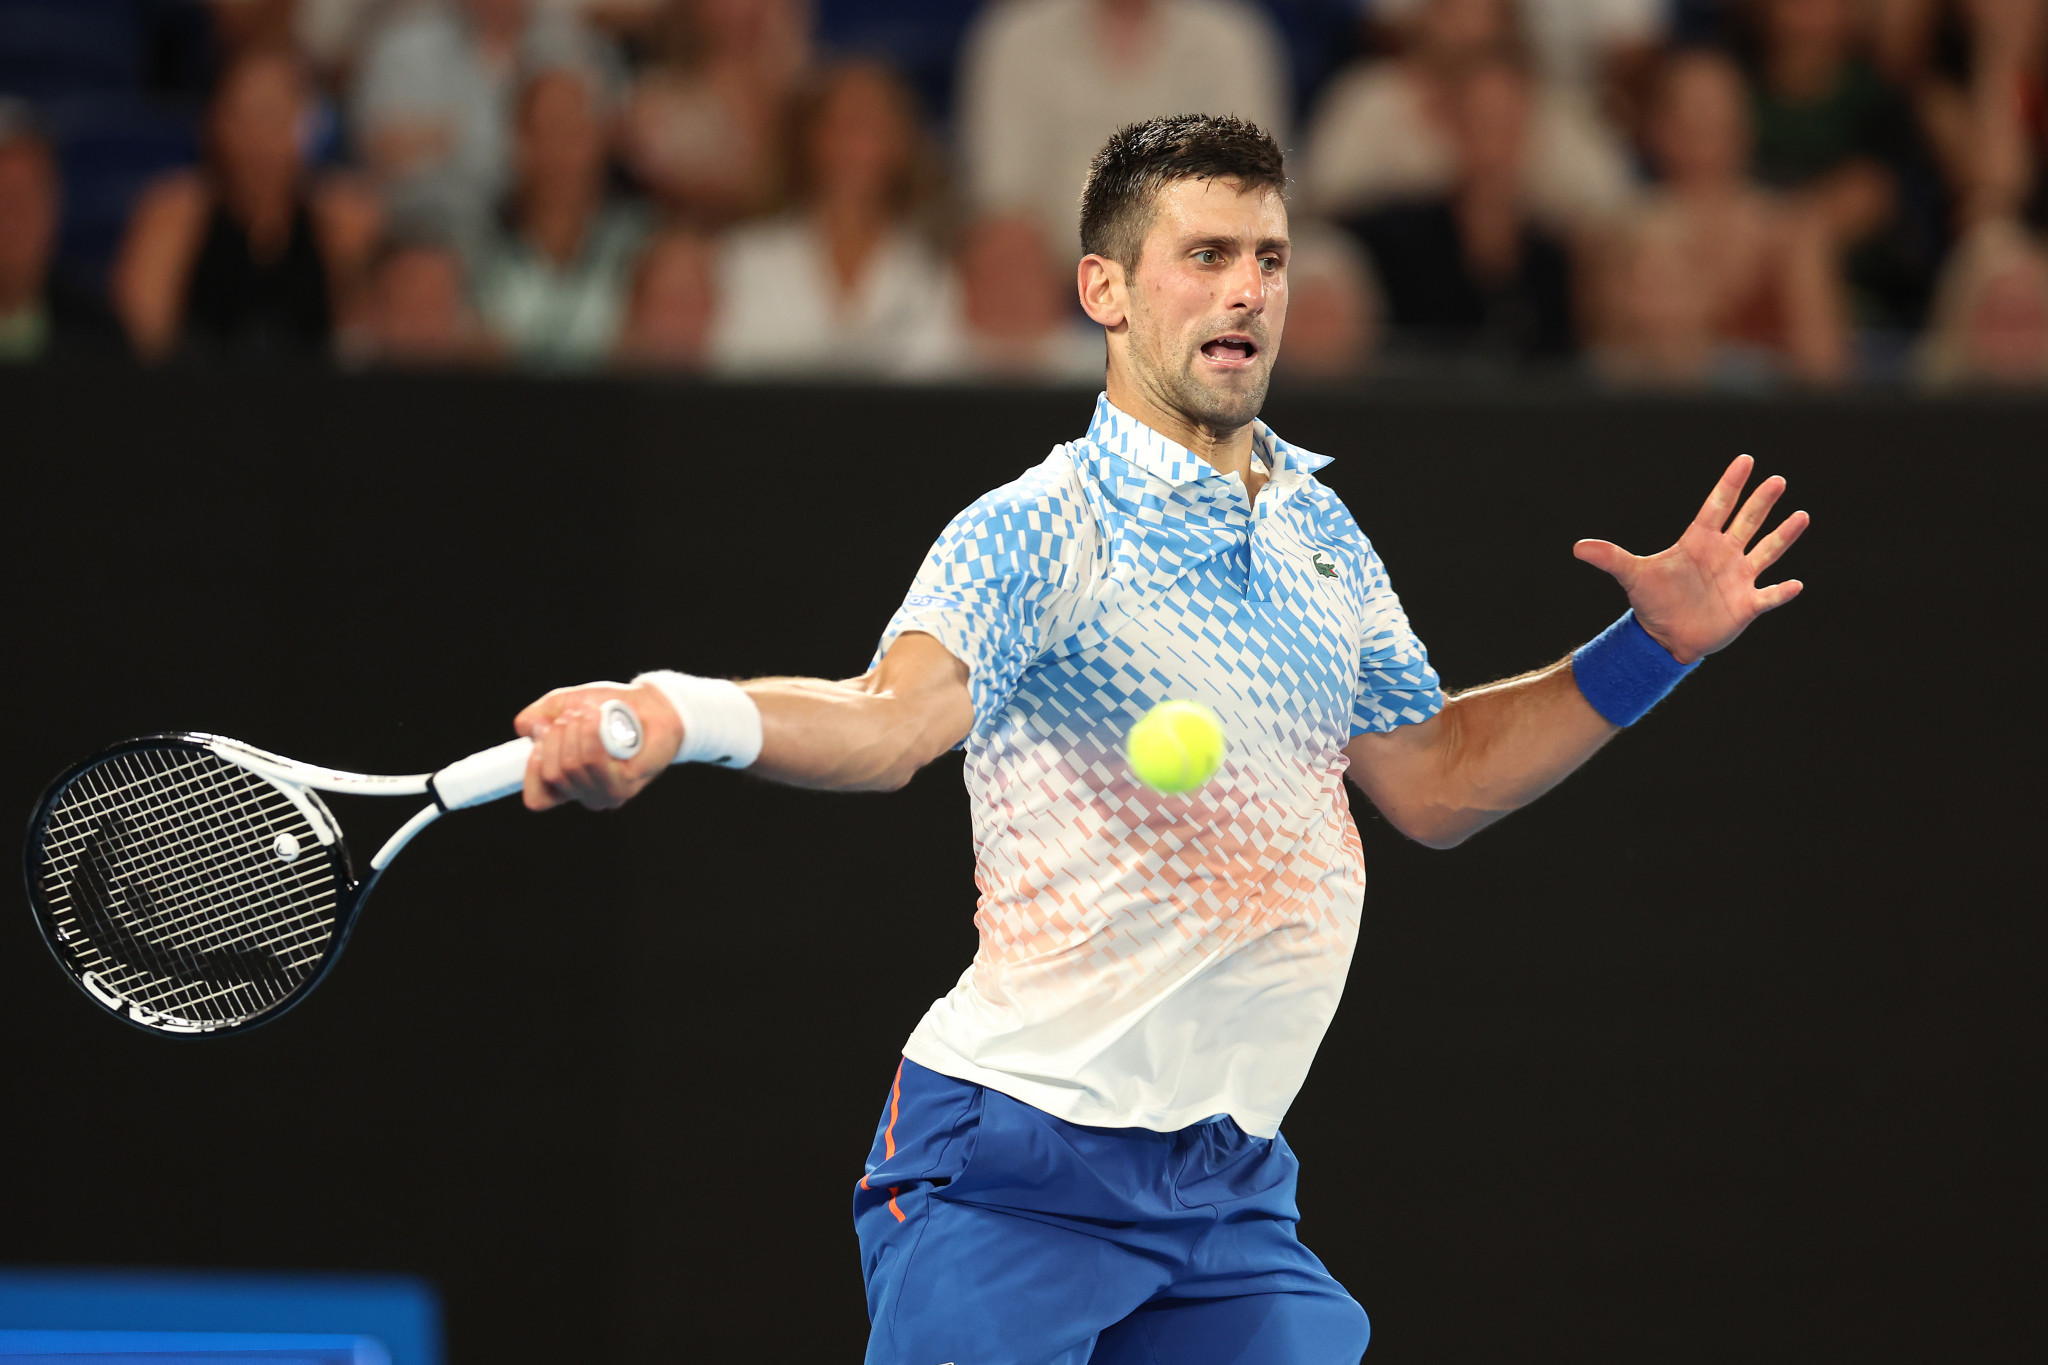 Novak Djokovic has had his appeal to enter the US allegedly rejected as he was aiming to play in the Indian Wells Open ©Getty Images